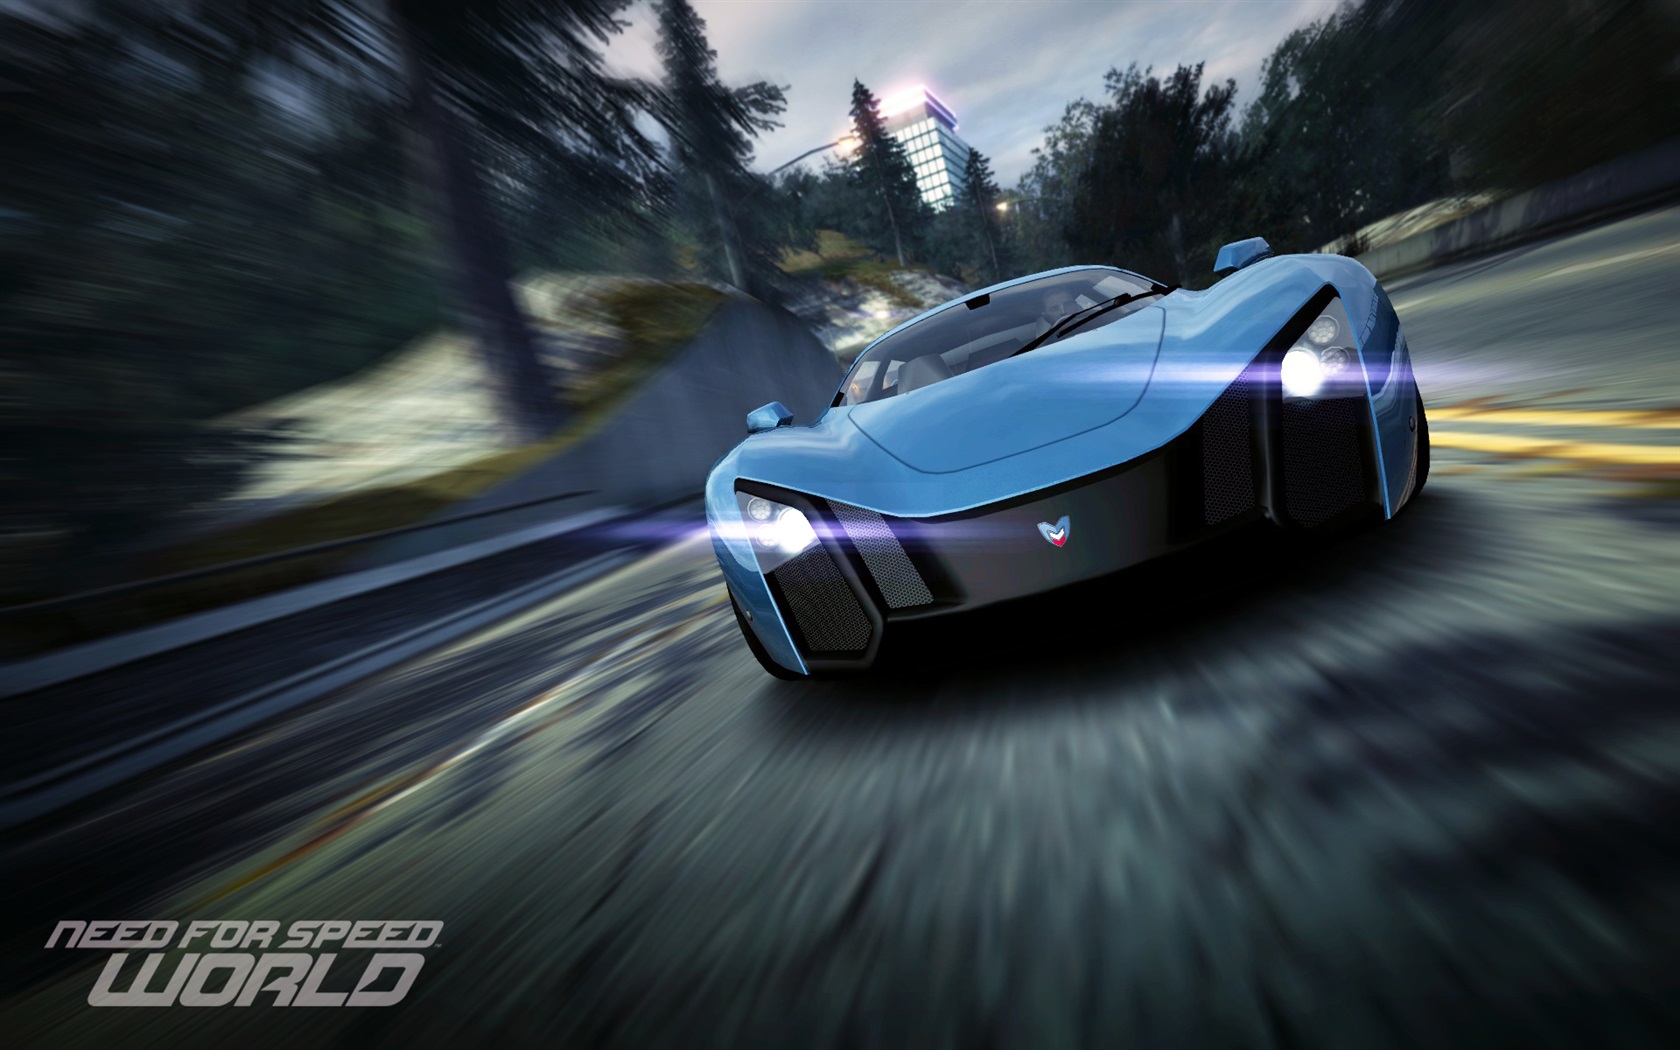 Wallpaper Need for Speed: World 1920x1200 HD Picture, Image